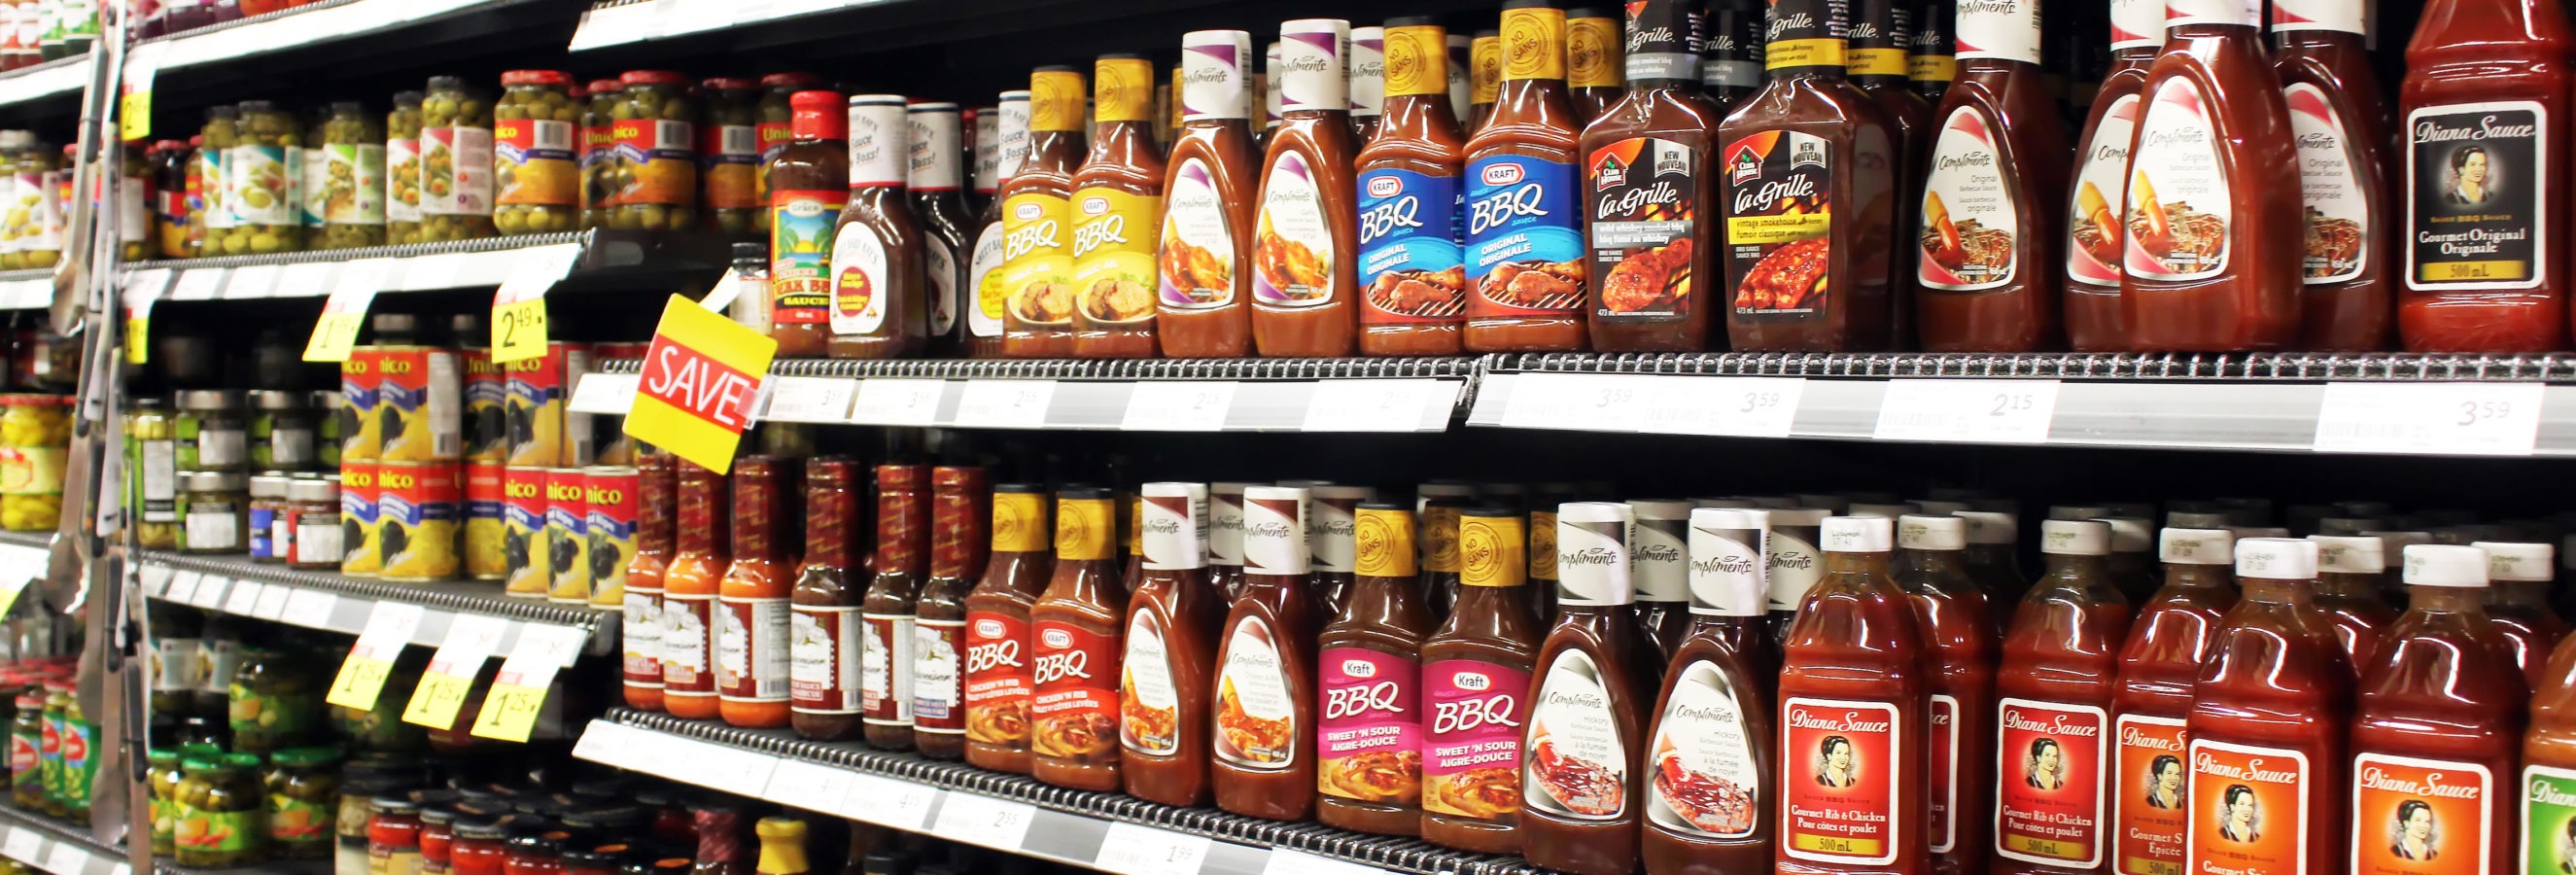 sauces on grocery shelf